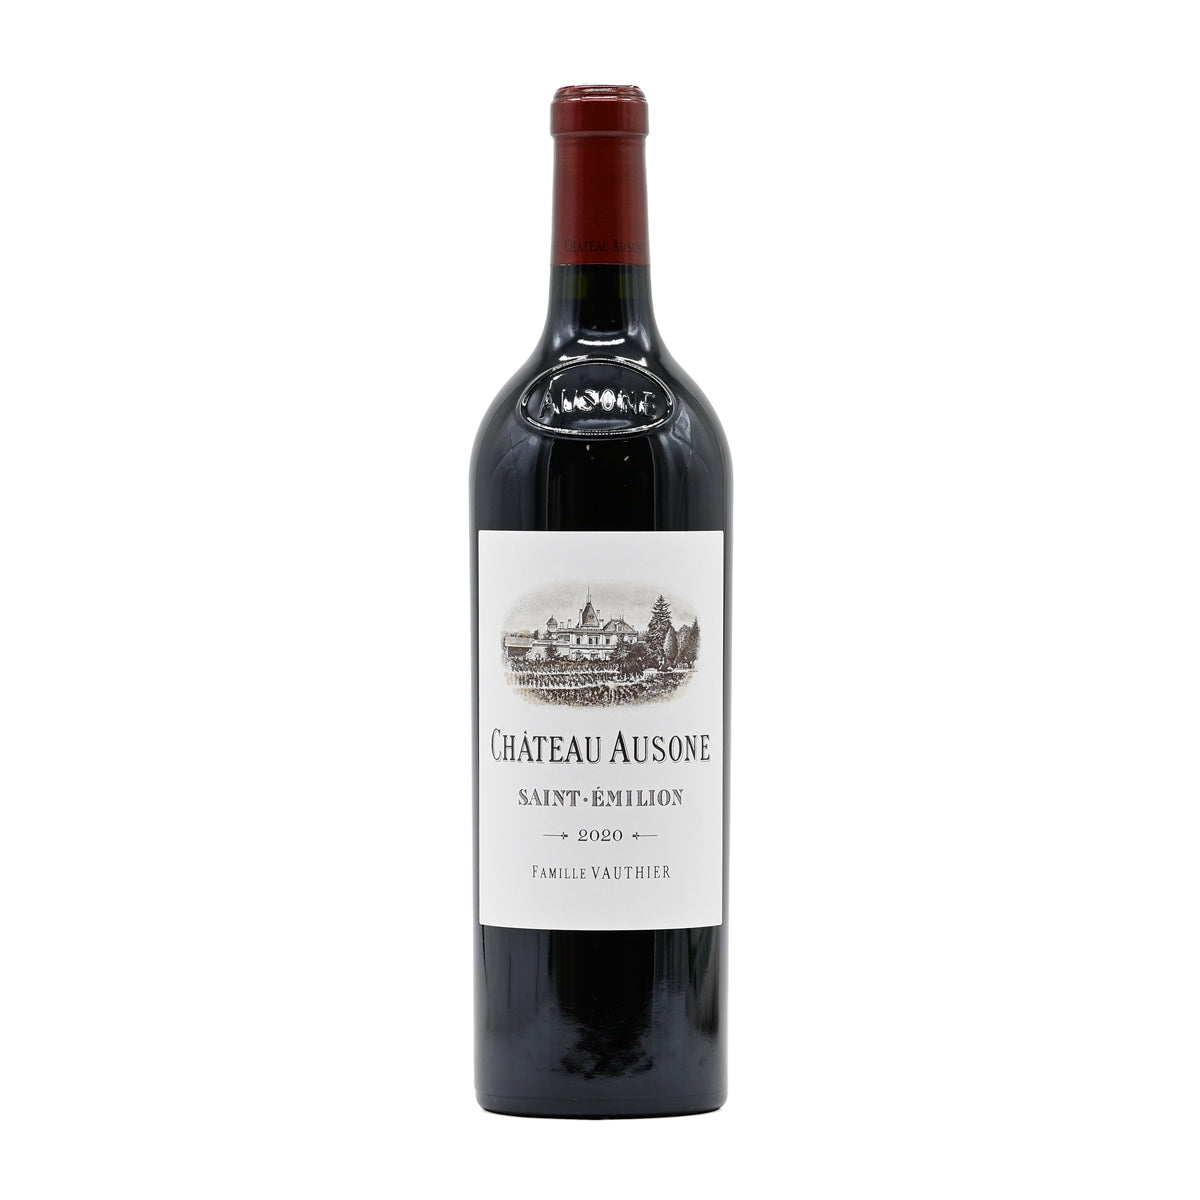 Château Ausone 2020, 750ml French red wine; made of a blend of Merlot and Cabernet Franc; from Saint-Emilion Grand Cru, Bordeaux, France – GDV Fine Wines, Hong Kong